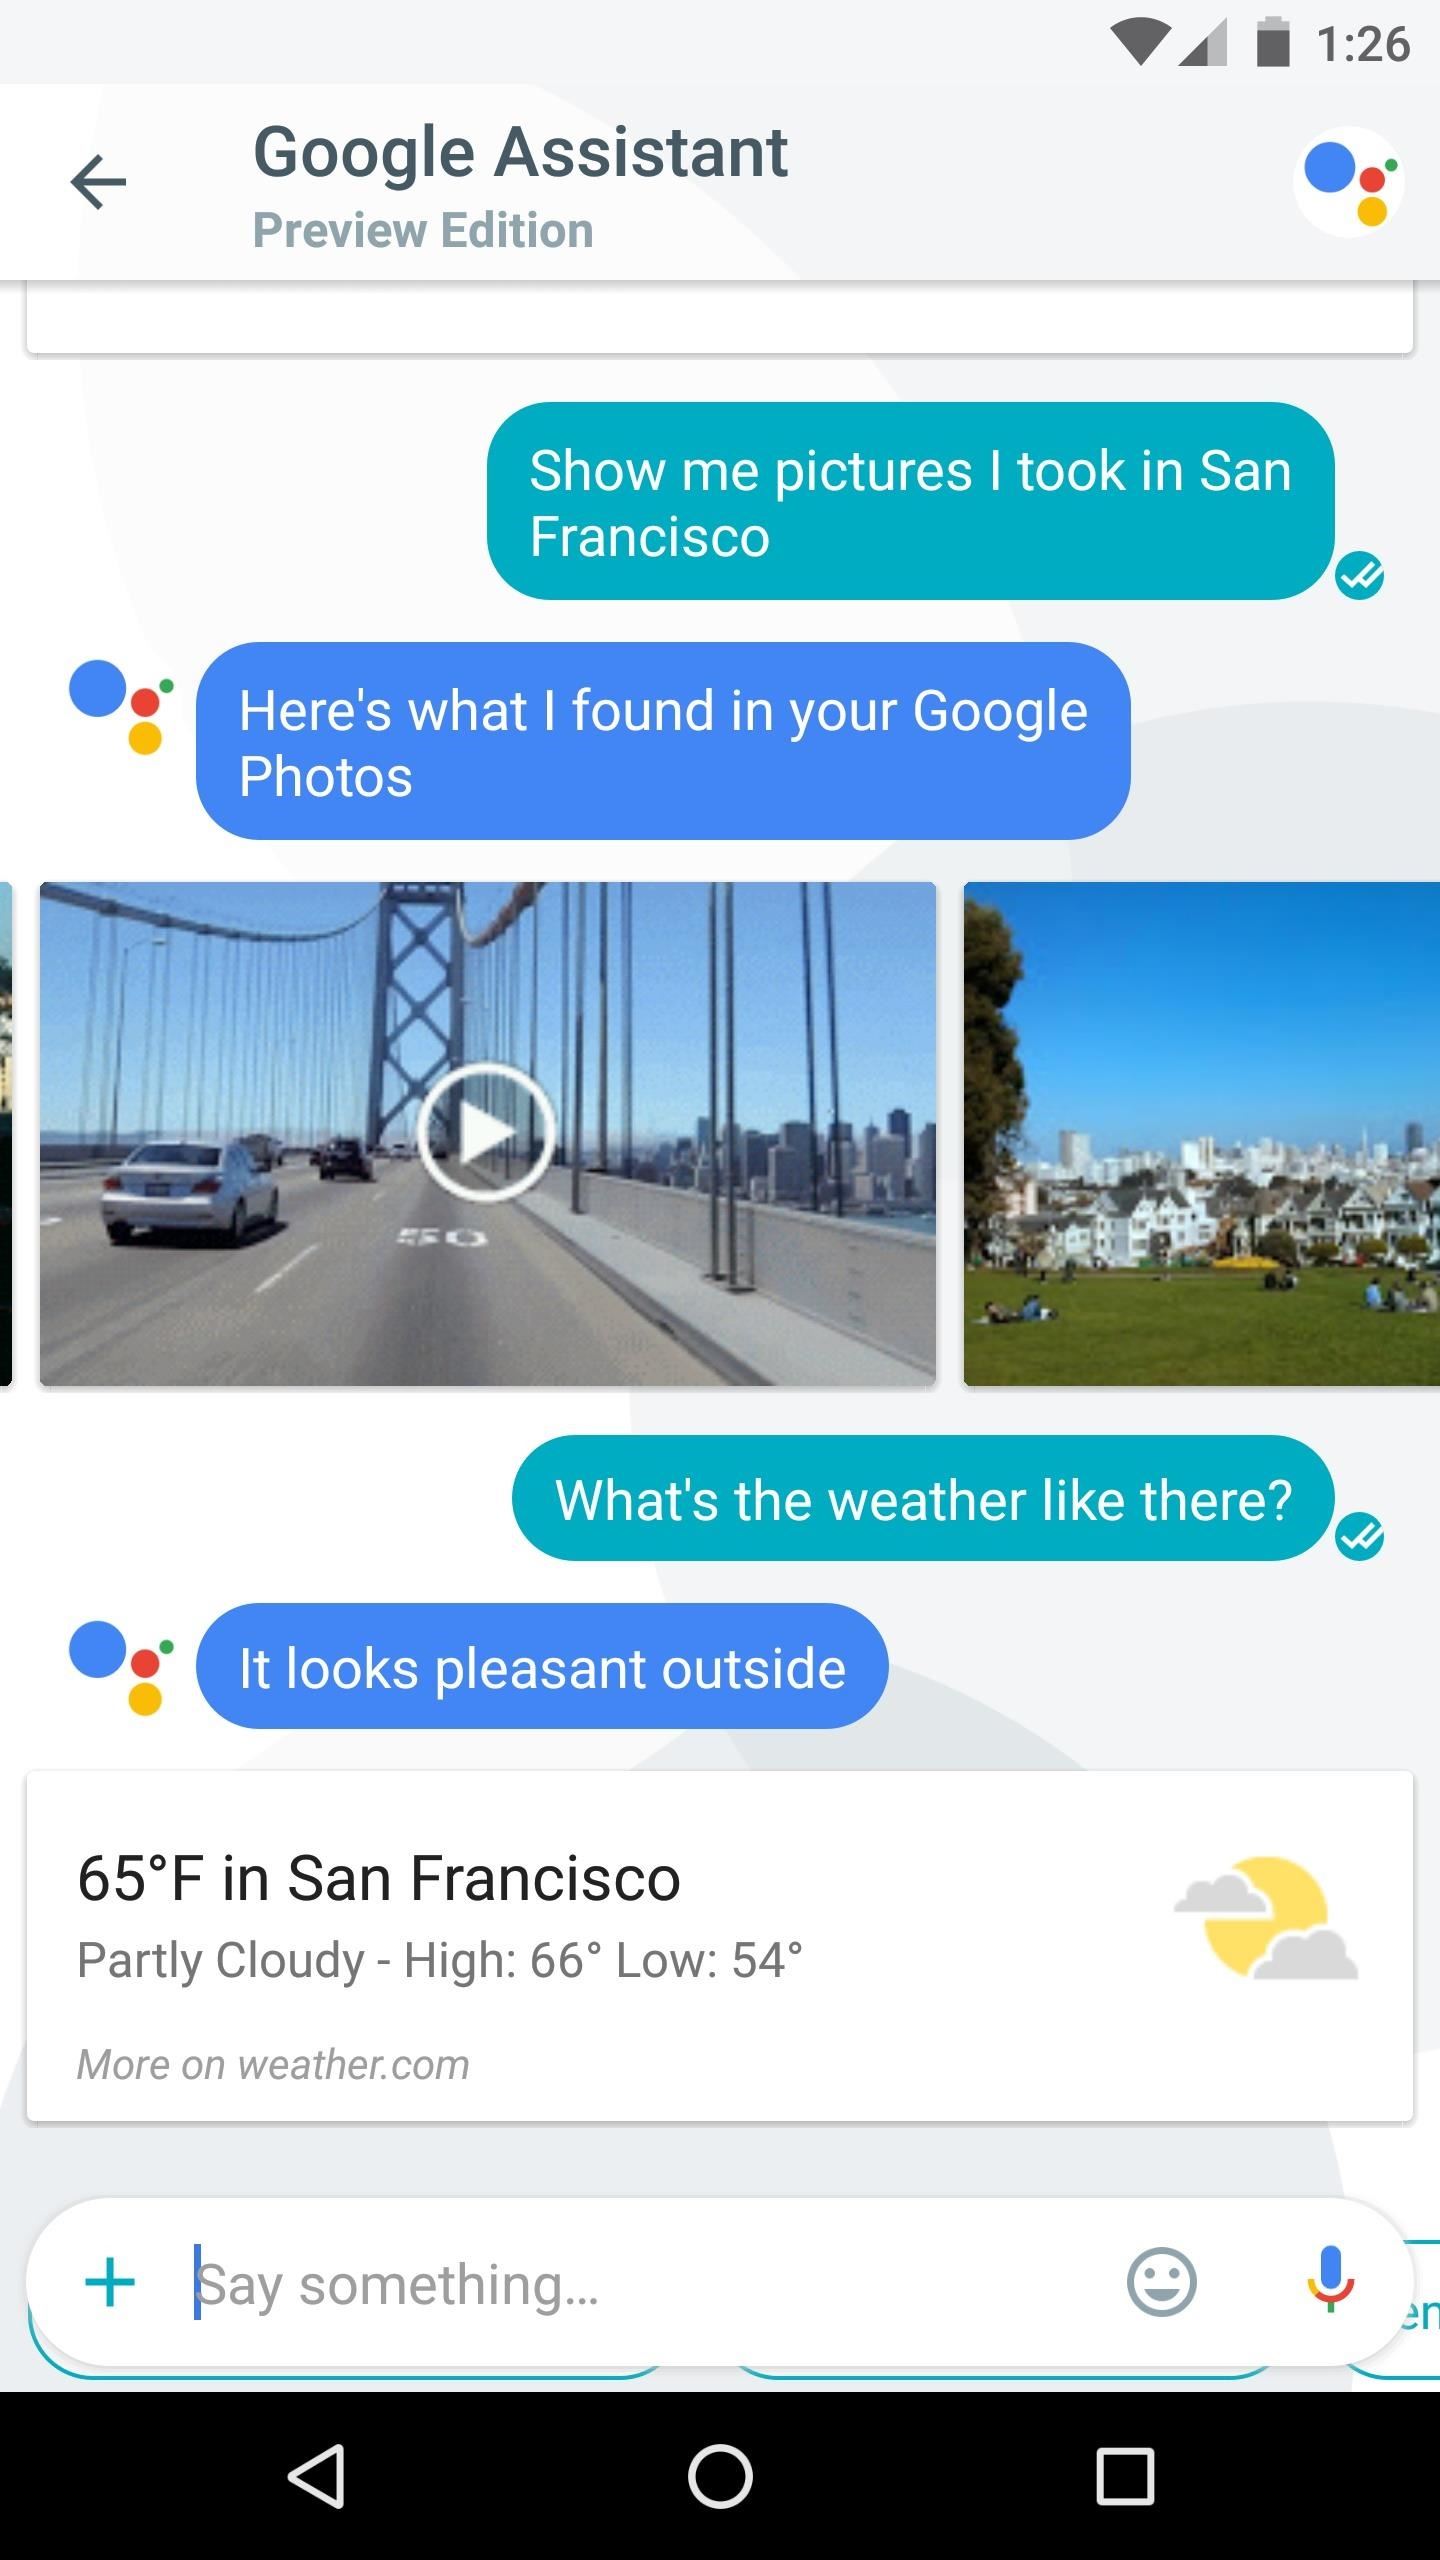 10 Things Google Assistant Can Do to Make Your Life Easier